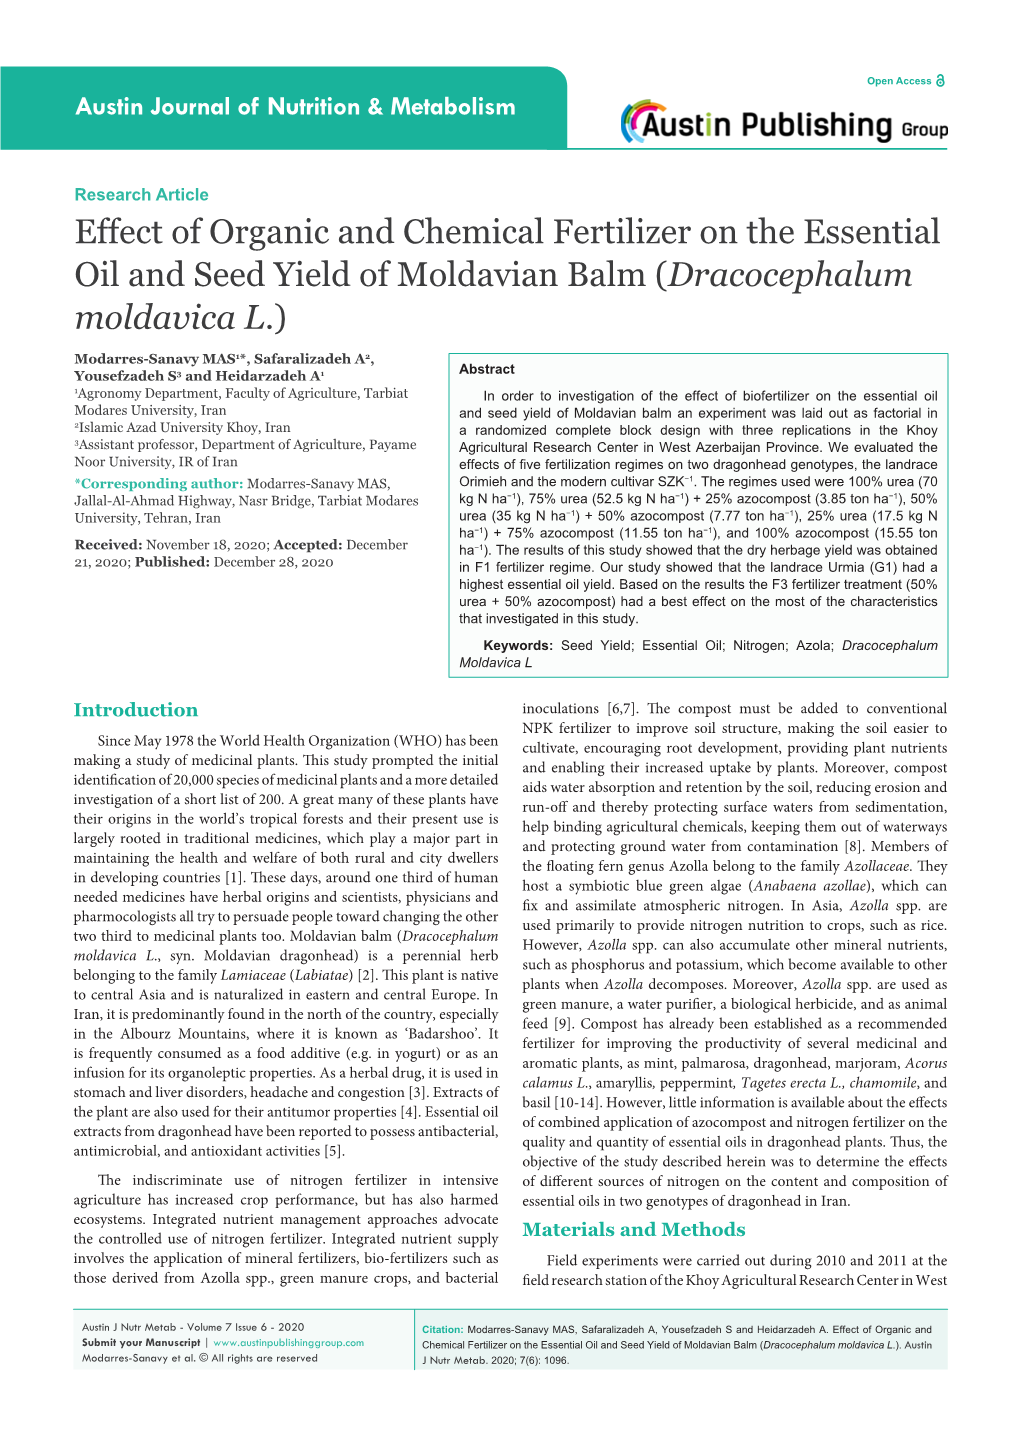 Effect of Organic and Chemical Fertilizer on the Essential Oil and Seed Yield of Moldavian Balm (Dracocephalum Moldavica L.)